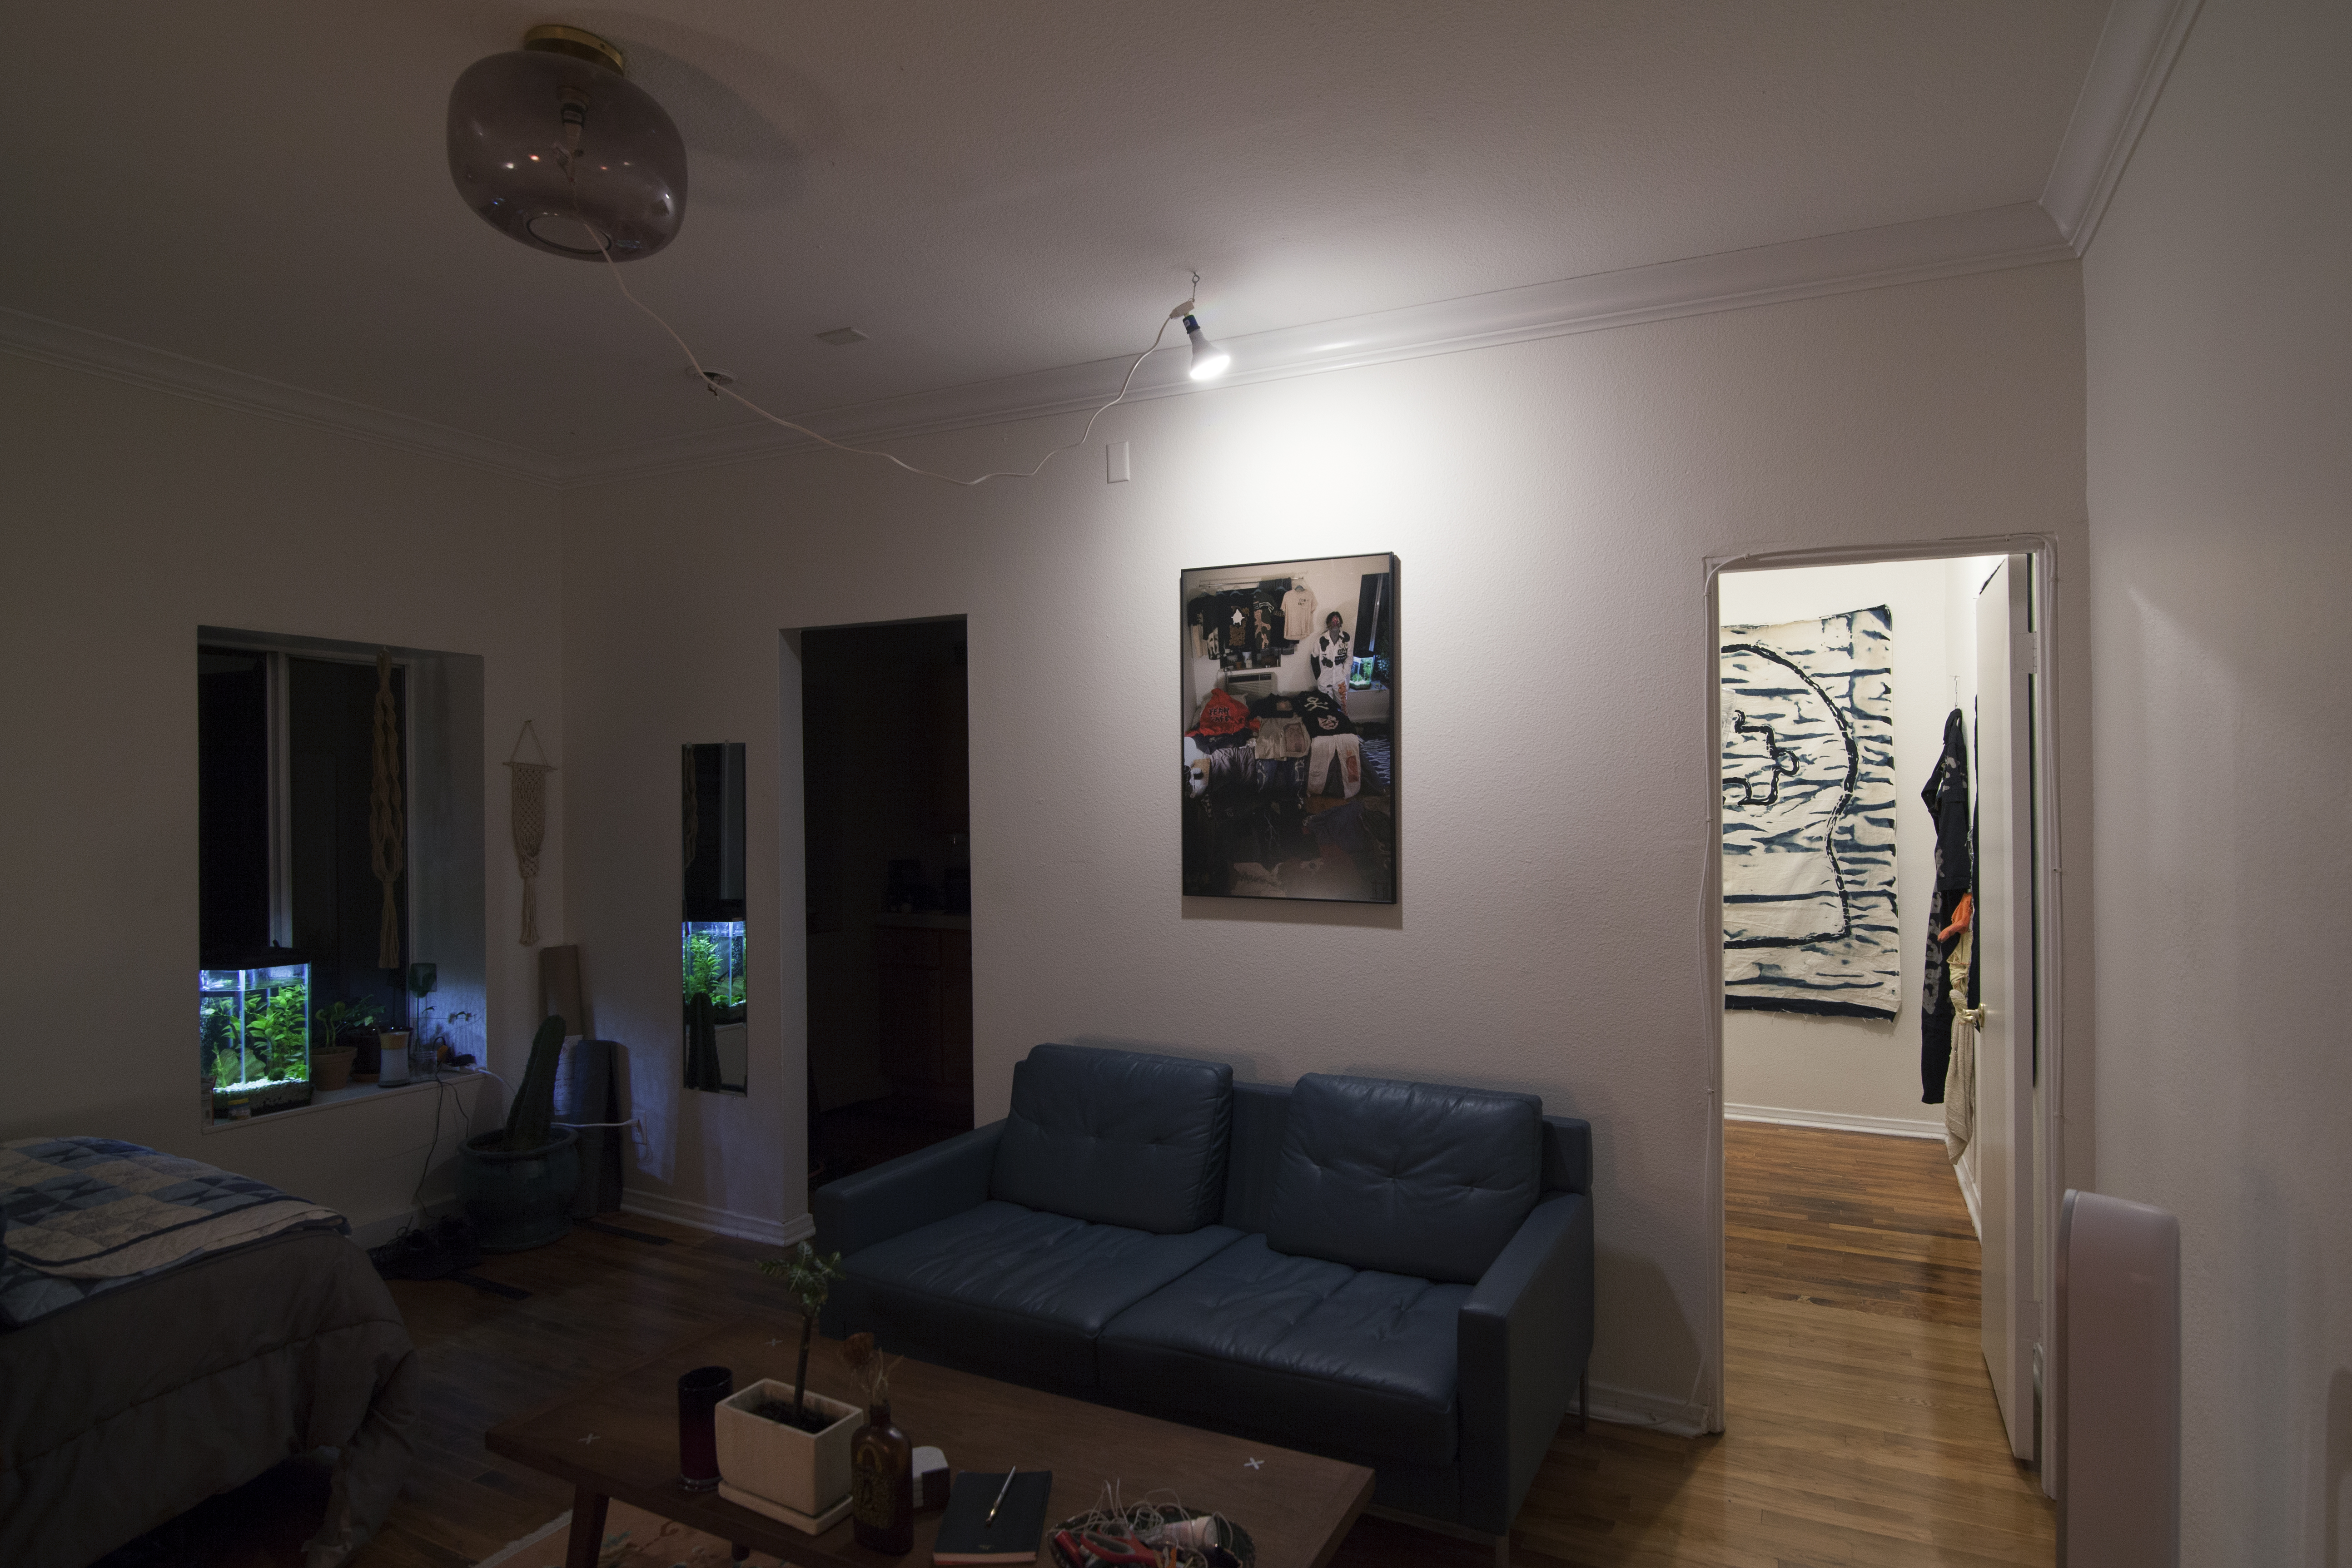 Photo of a living room with a large photo print lit from above hung over a couch